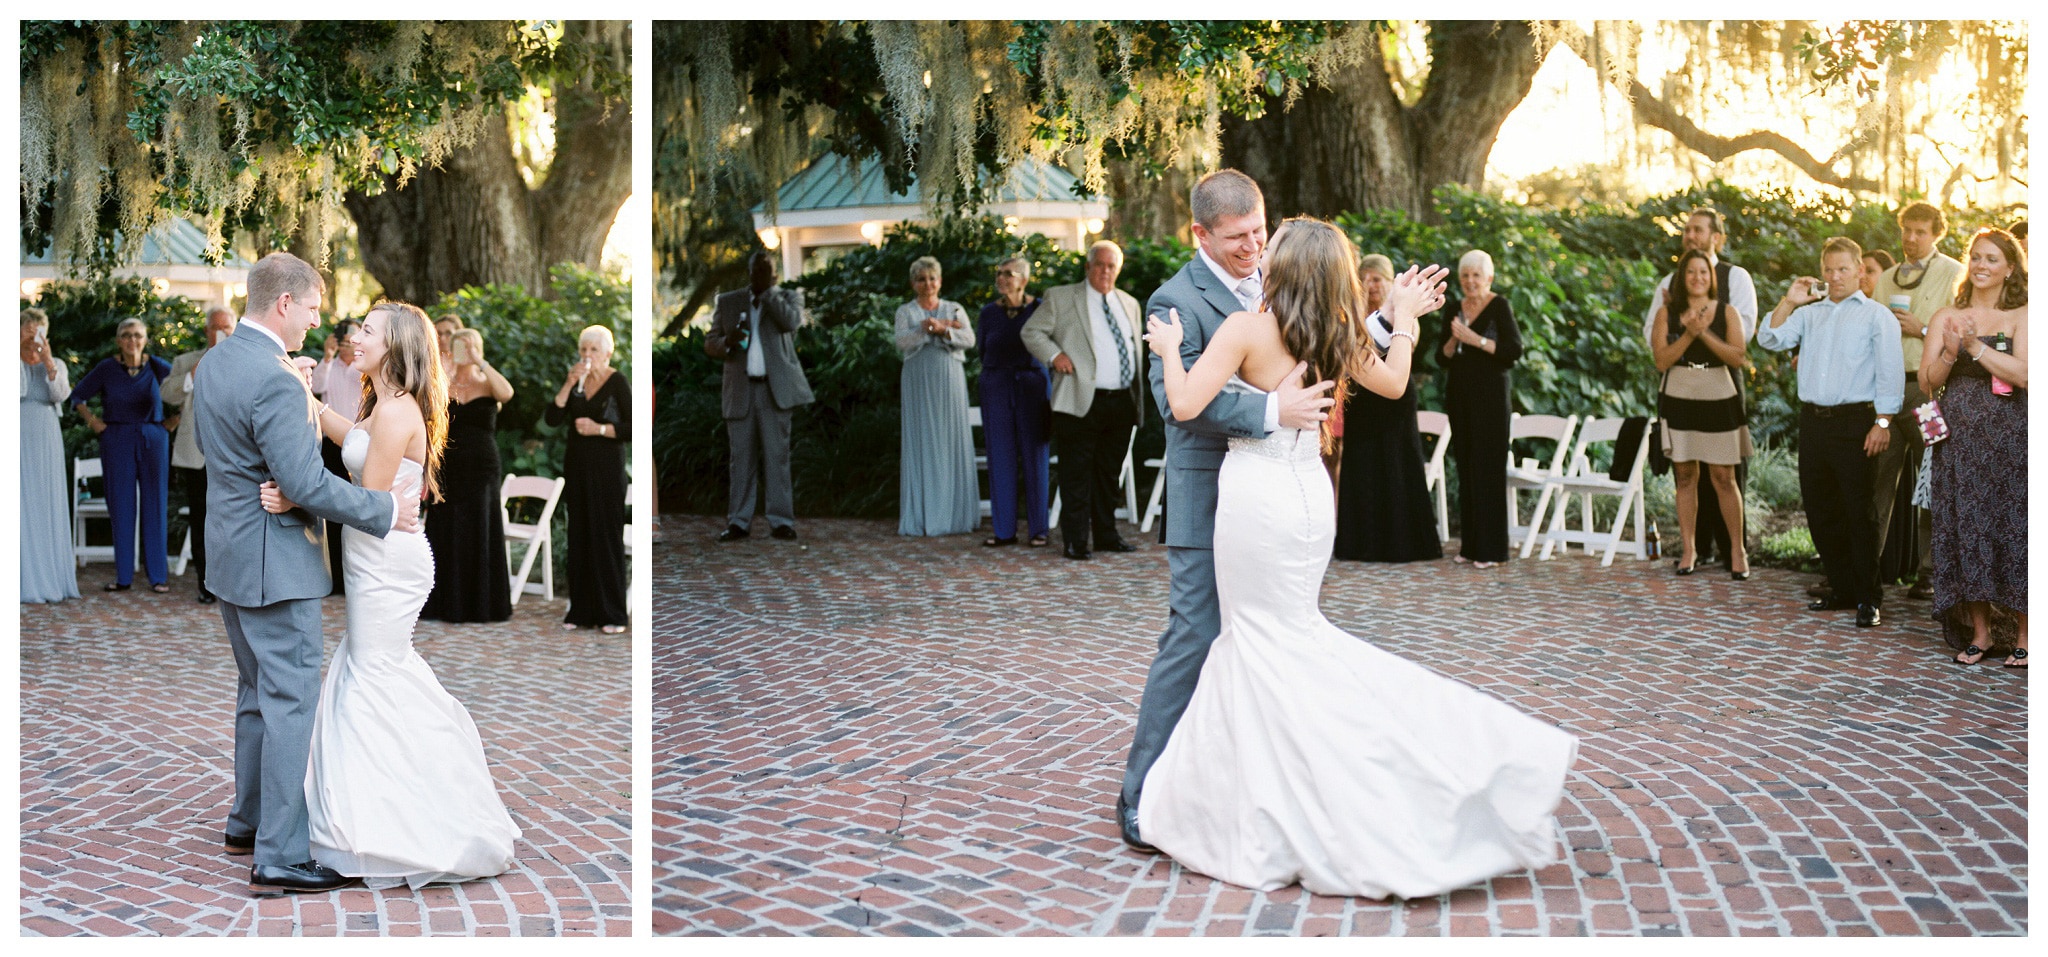 First Dance of the Evening for just the married couple, Kay and Josh's wedding at the Heritage Plantation, Pawleys Island, South Carolina on September 19, 2015 Heritage Plantation Southern wedding, Pawleys Island, South Carolina Venue and Catering: Heritage Club, Pawleys Island Music: Paul Matthews Entertainment Brides dress: The Little White Dress Cake: Buttercream Cakes and Catering Event Rentals: Eventworks Photographer: One Life Photography